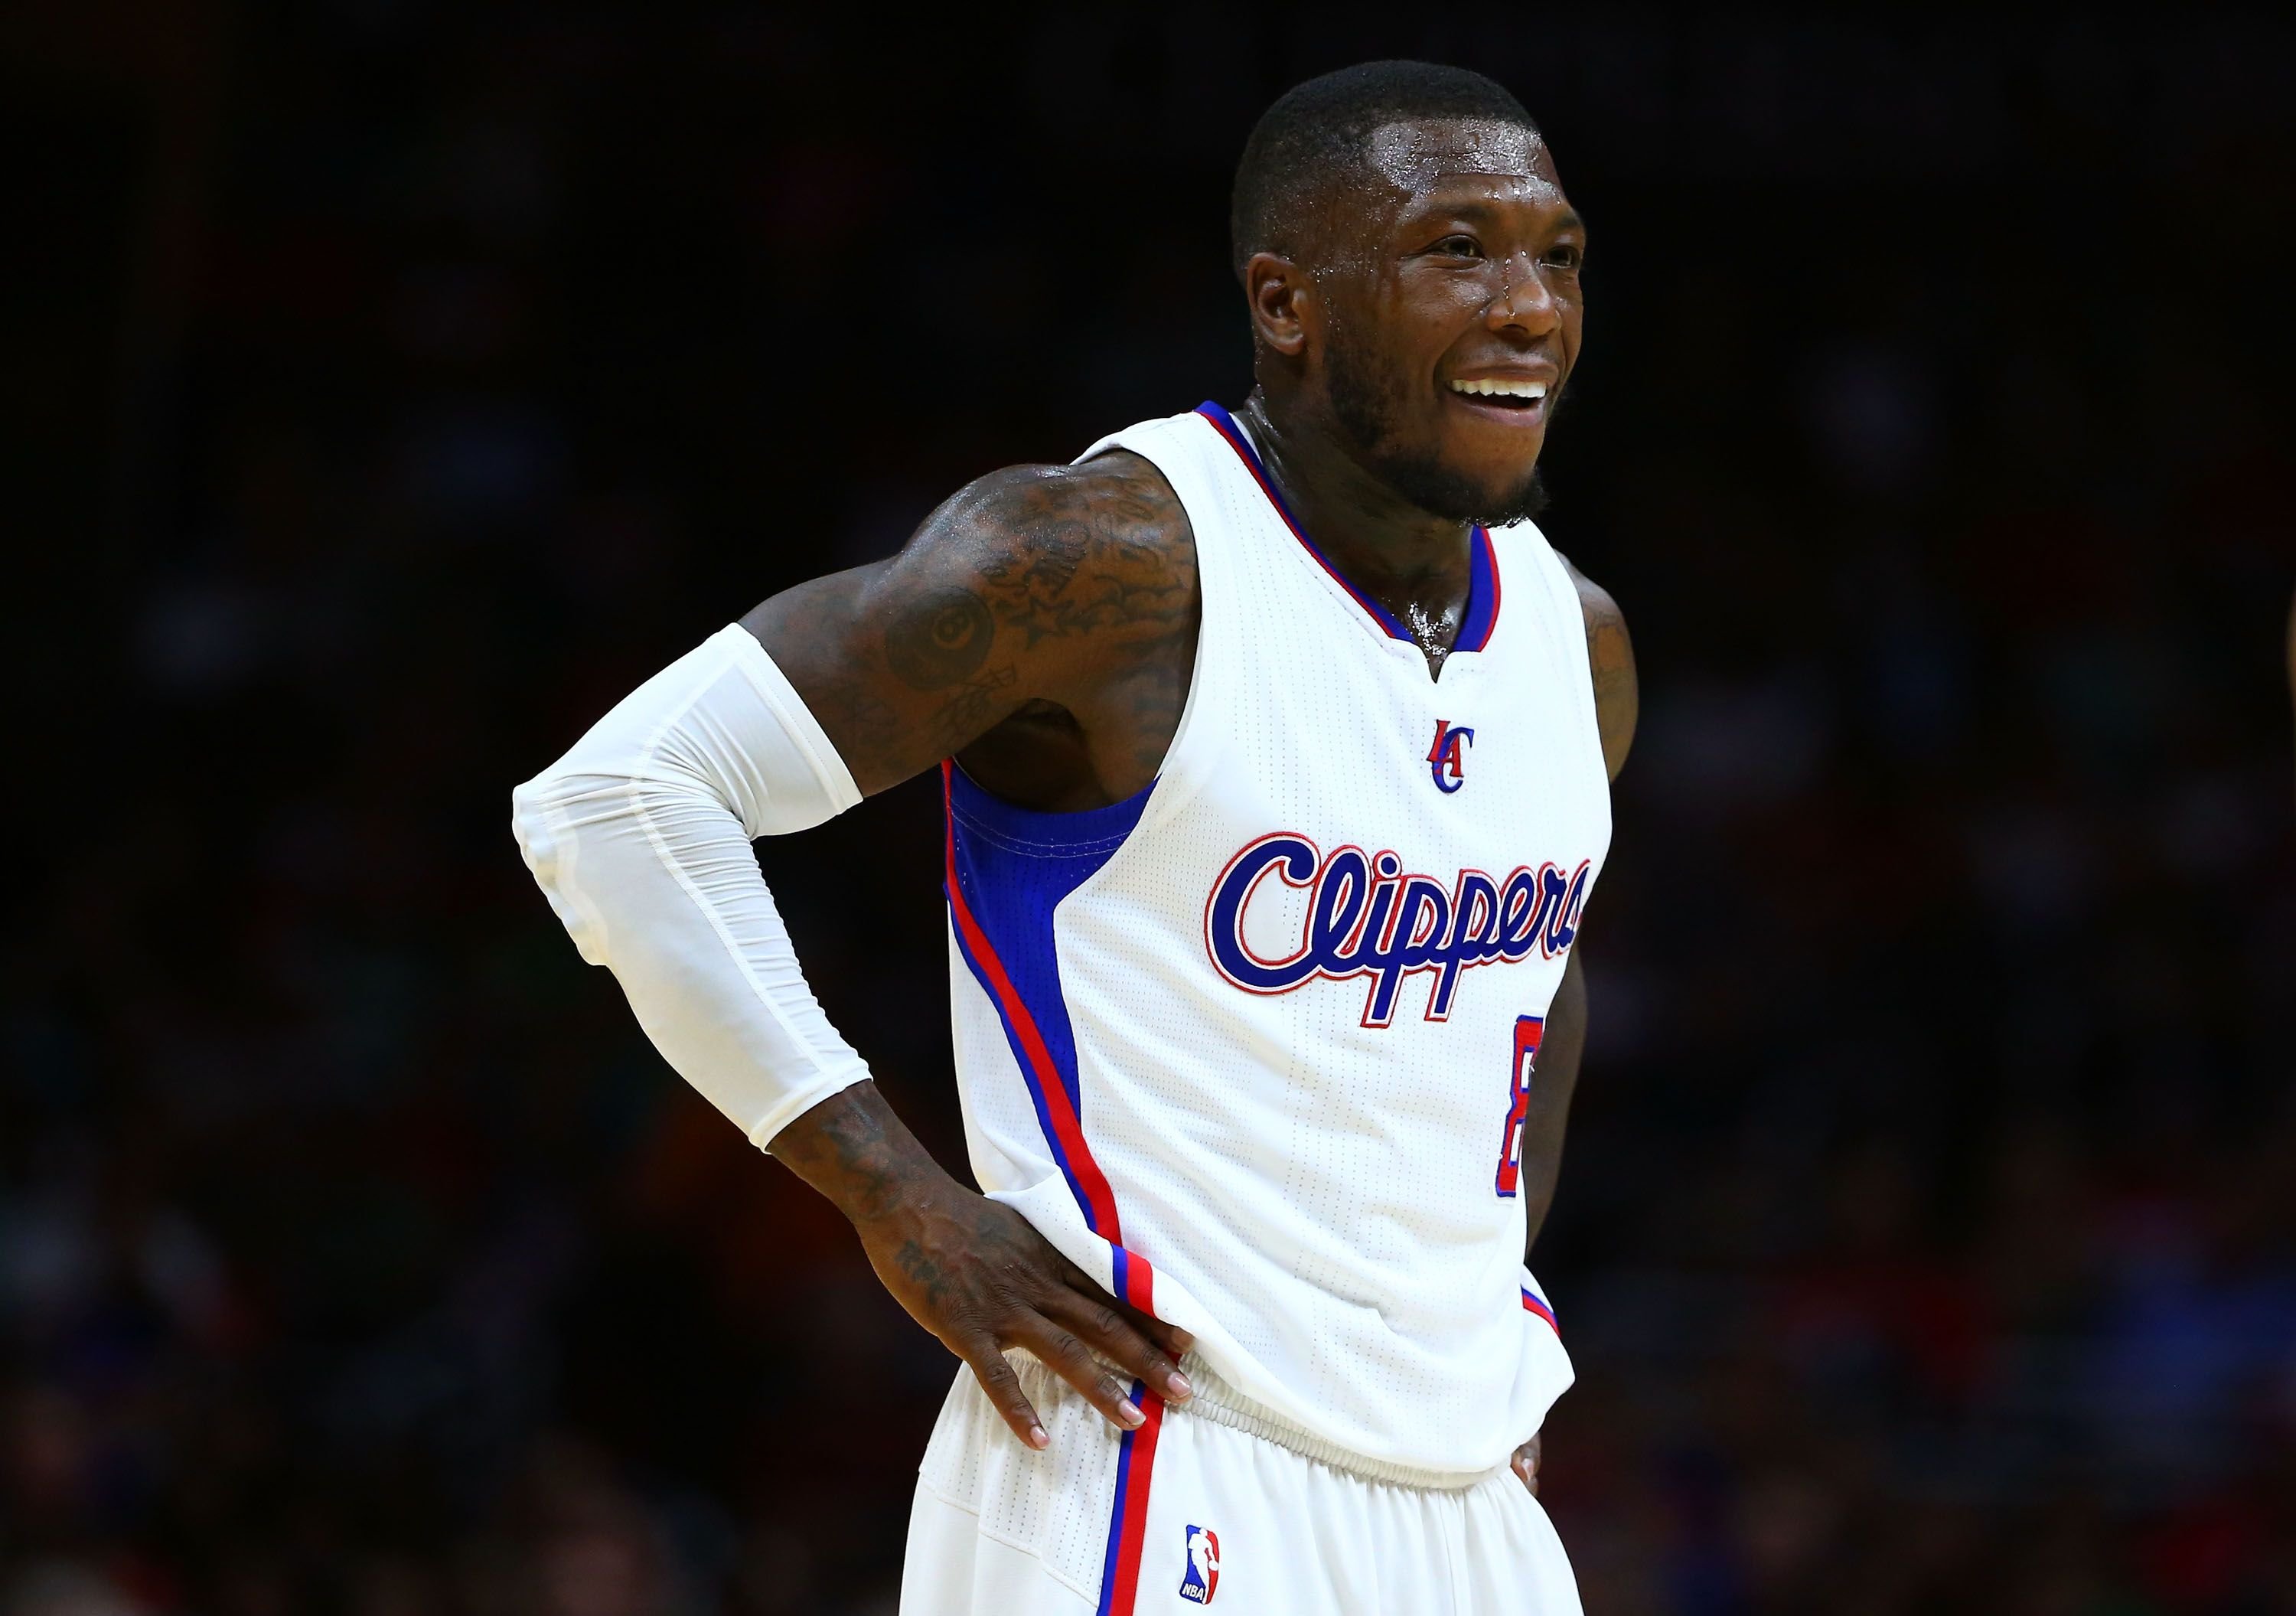 Nate Robinson #8 of the Los Angeles Clippers looks on during the NBA game against the Charlotte Hornets at Staples Center on March 17, 2015 in Los Angeles, California. | Source: Getty Images